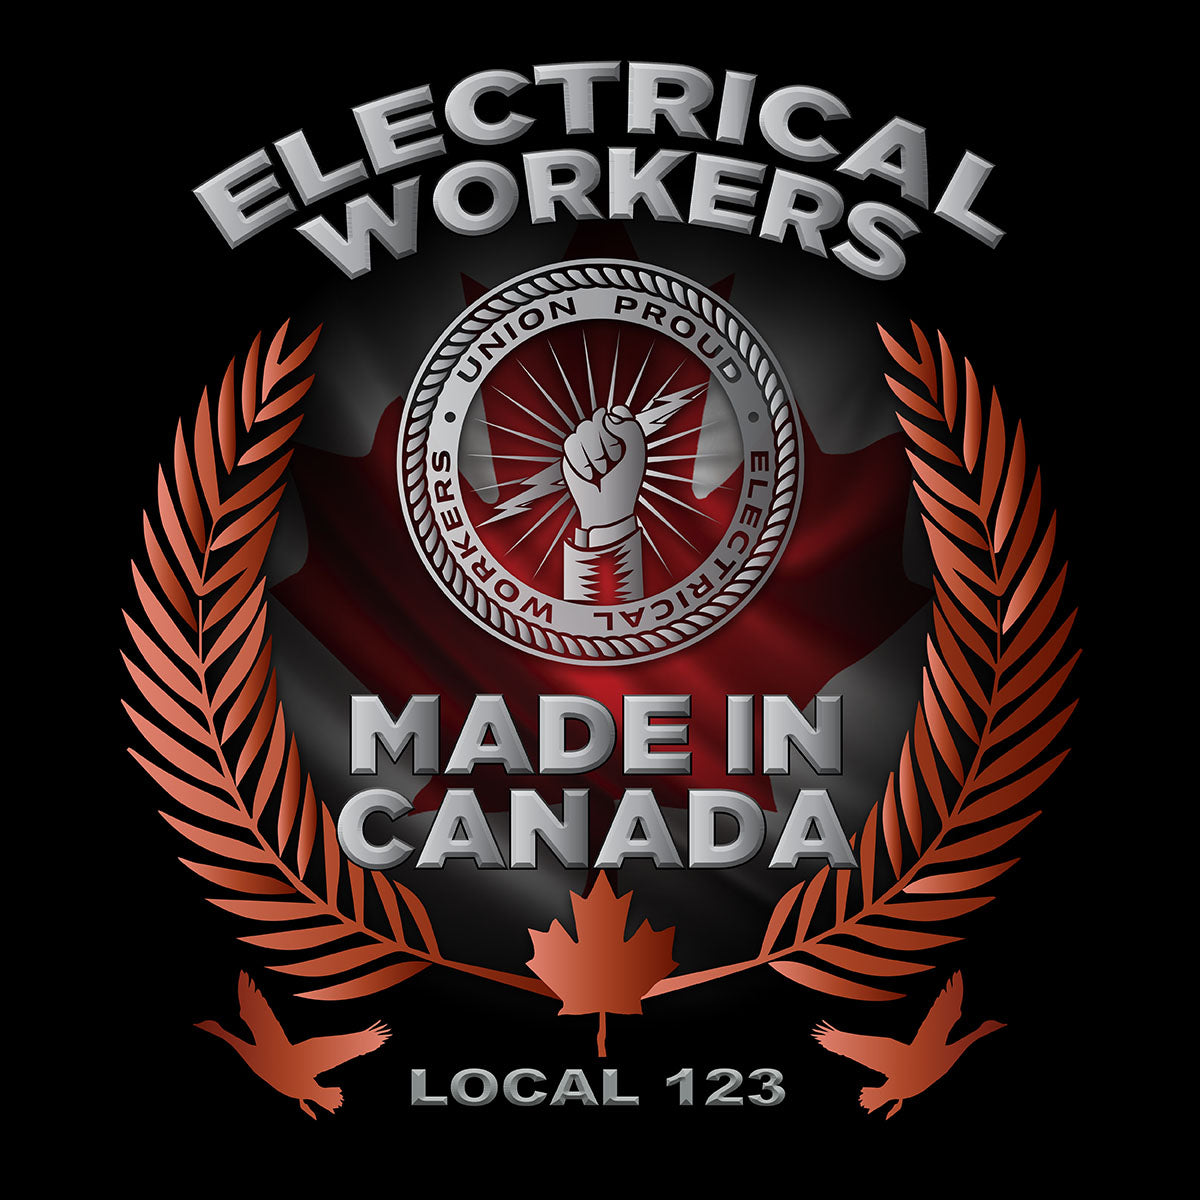 Electrical Workers Canadian Made